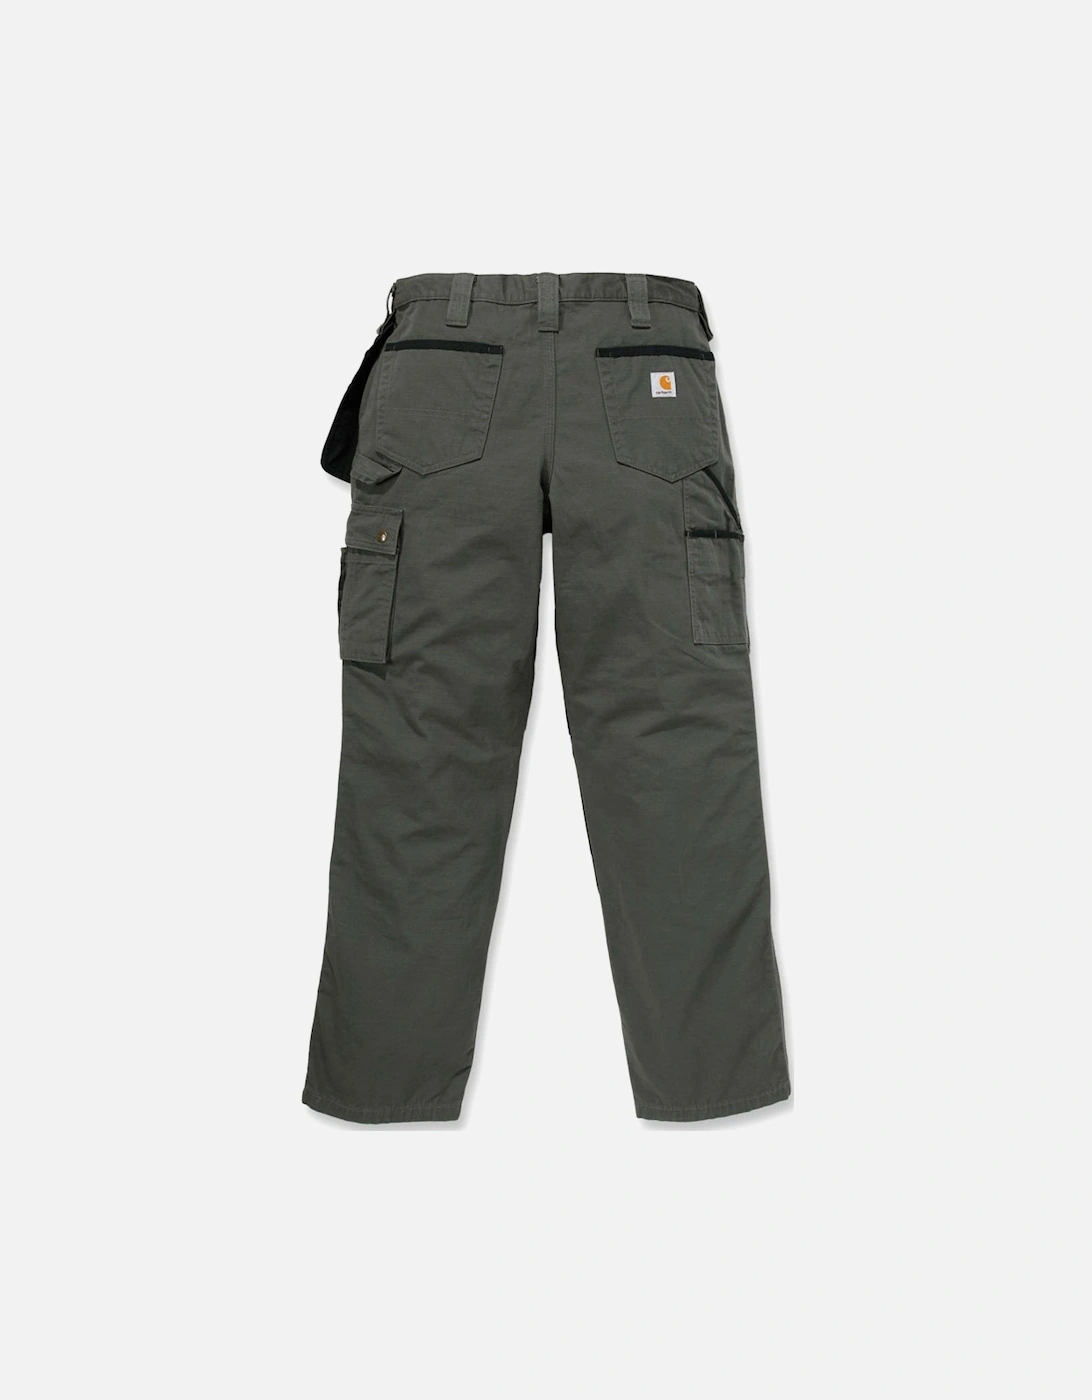 Carhartt Mens Multipocket Stitched Ripstop Cargo Pants Trousers